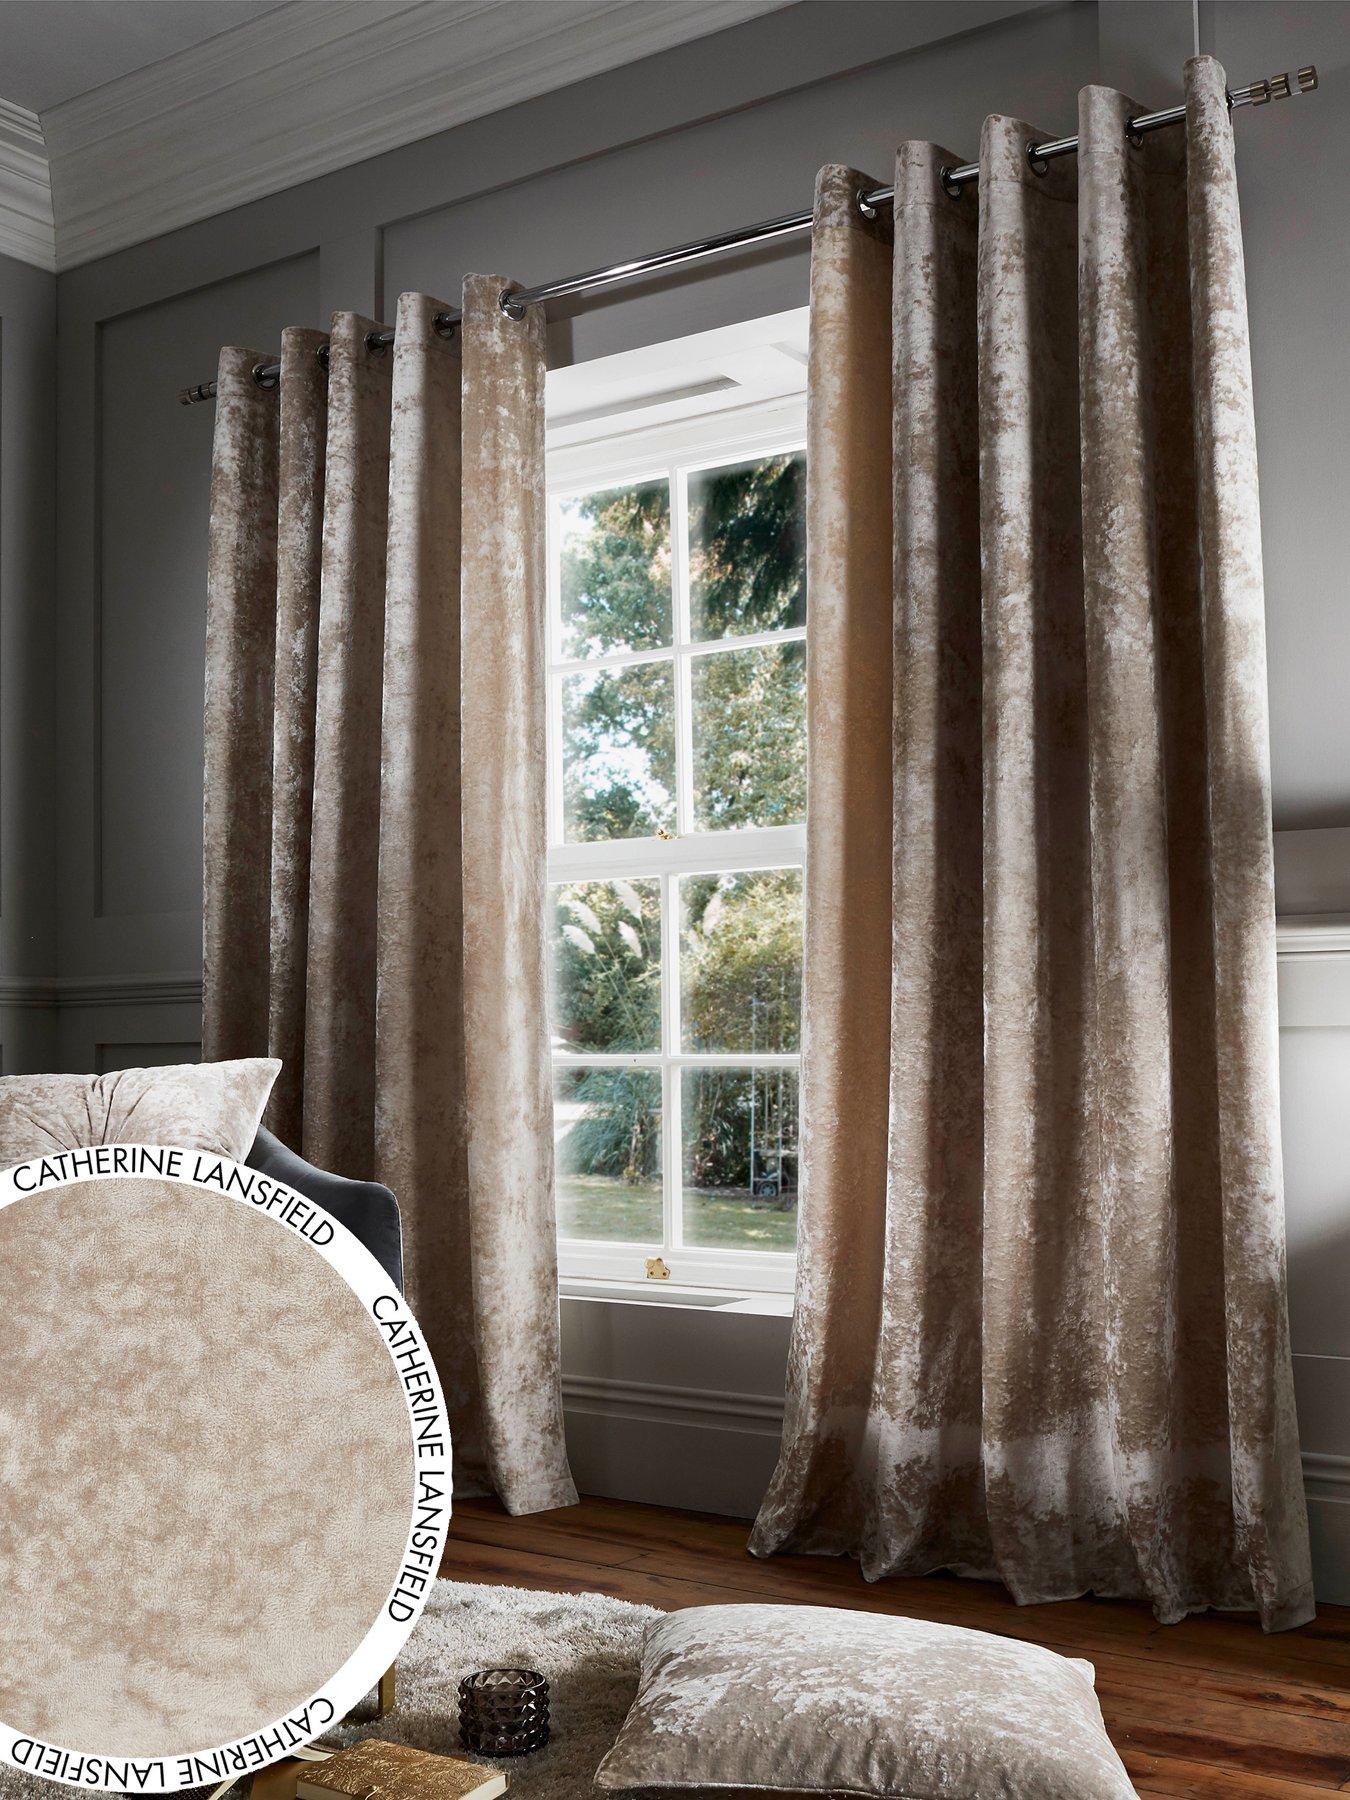 Catherine Lansfield, Melville Woven Texture, Fully Lined, Eyelet, Curtains, Grey